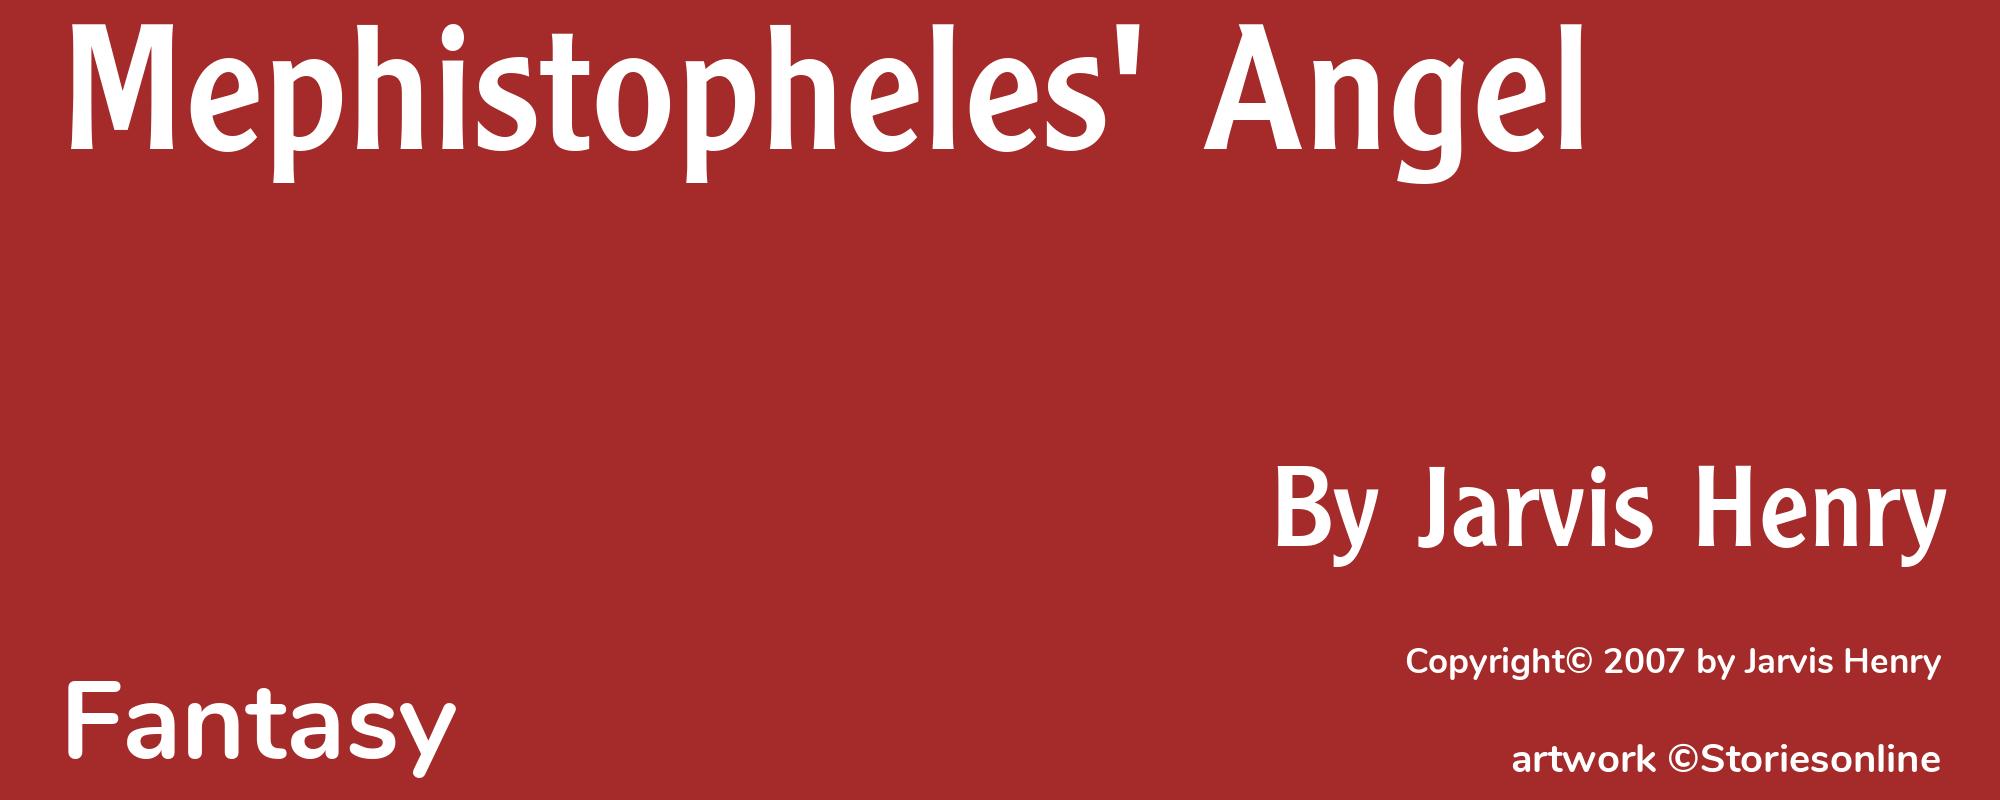 Mephistopheles' Angel - Cover